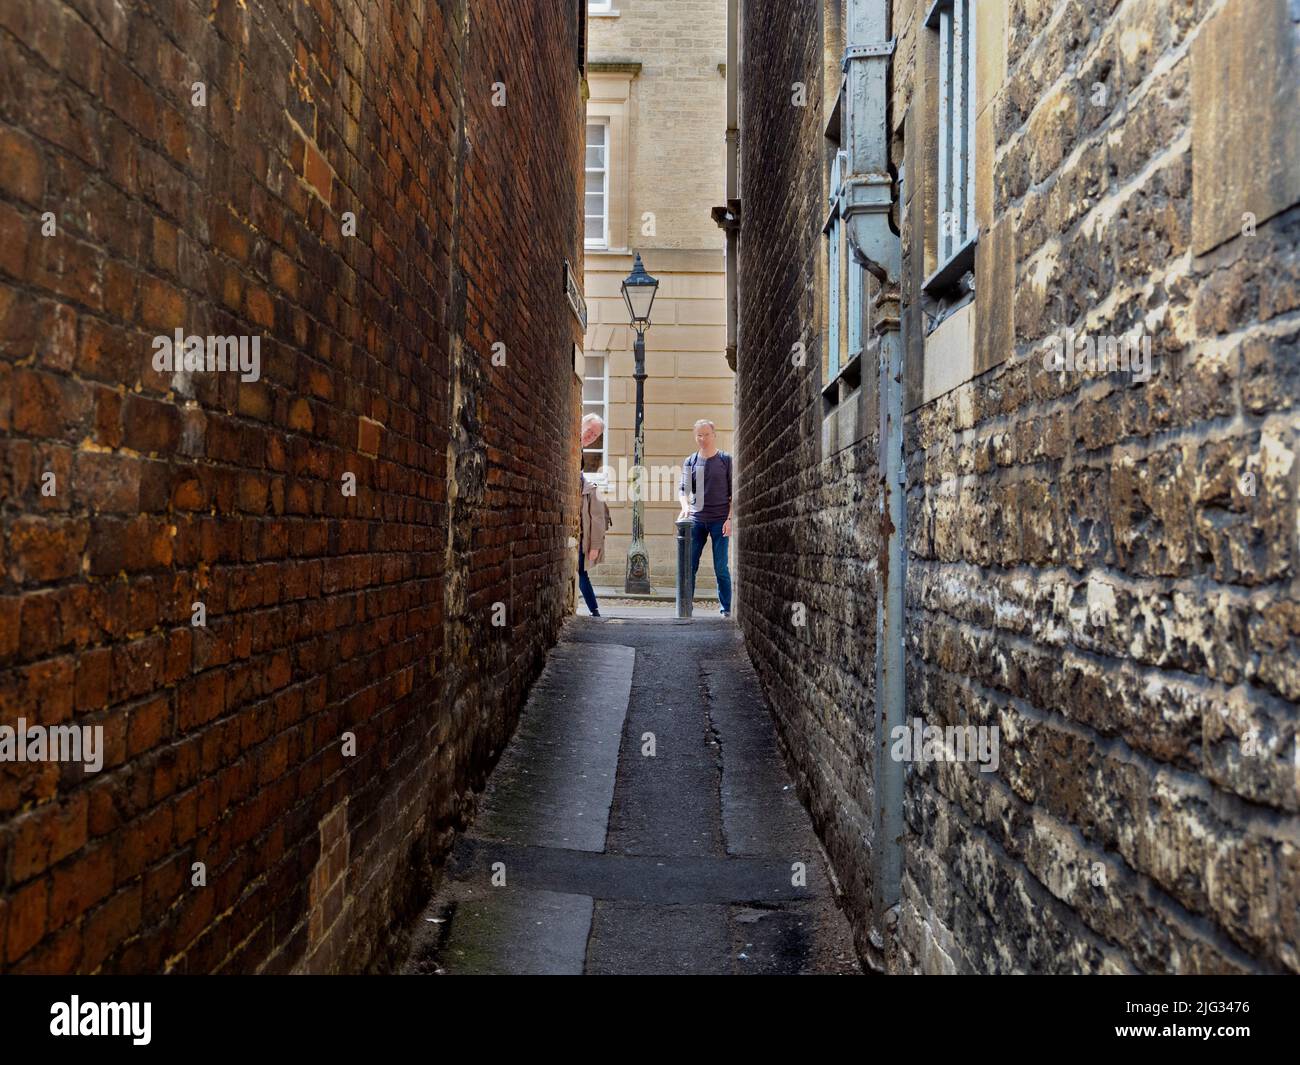 The historic city of Oxford has many famous sights, landmarks and university colleges to see. But just as interesting are its back streets, alleys and Stock Photo